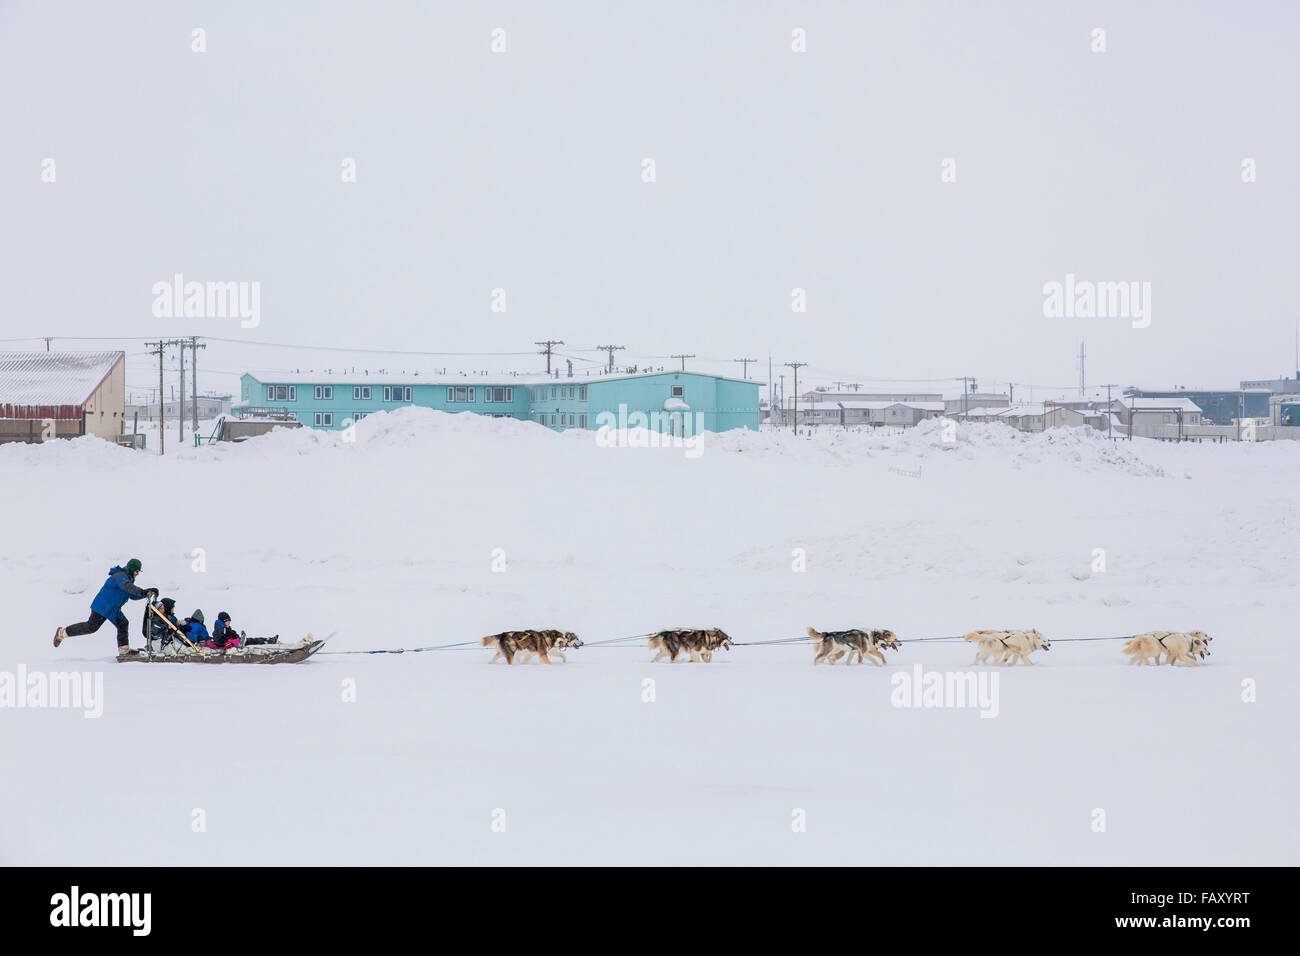 Elementary school children ride a sled pulled by sled dogs around the lagoon, Barrow, North Slope, Arctic Alaska, USA, Winter Stock Photo